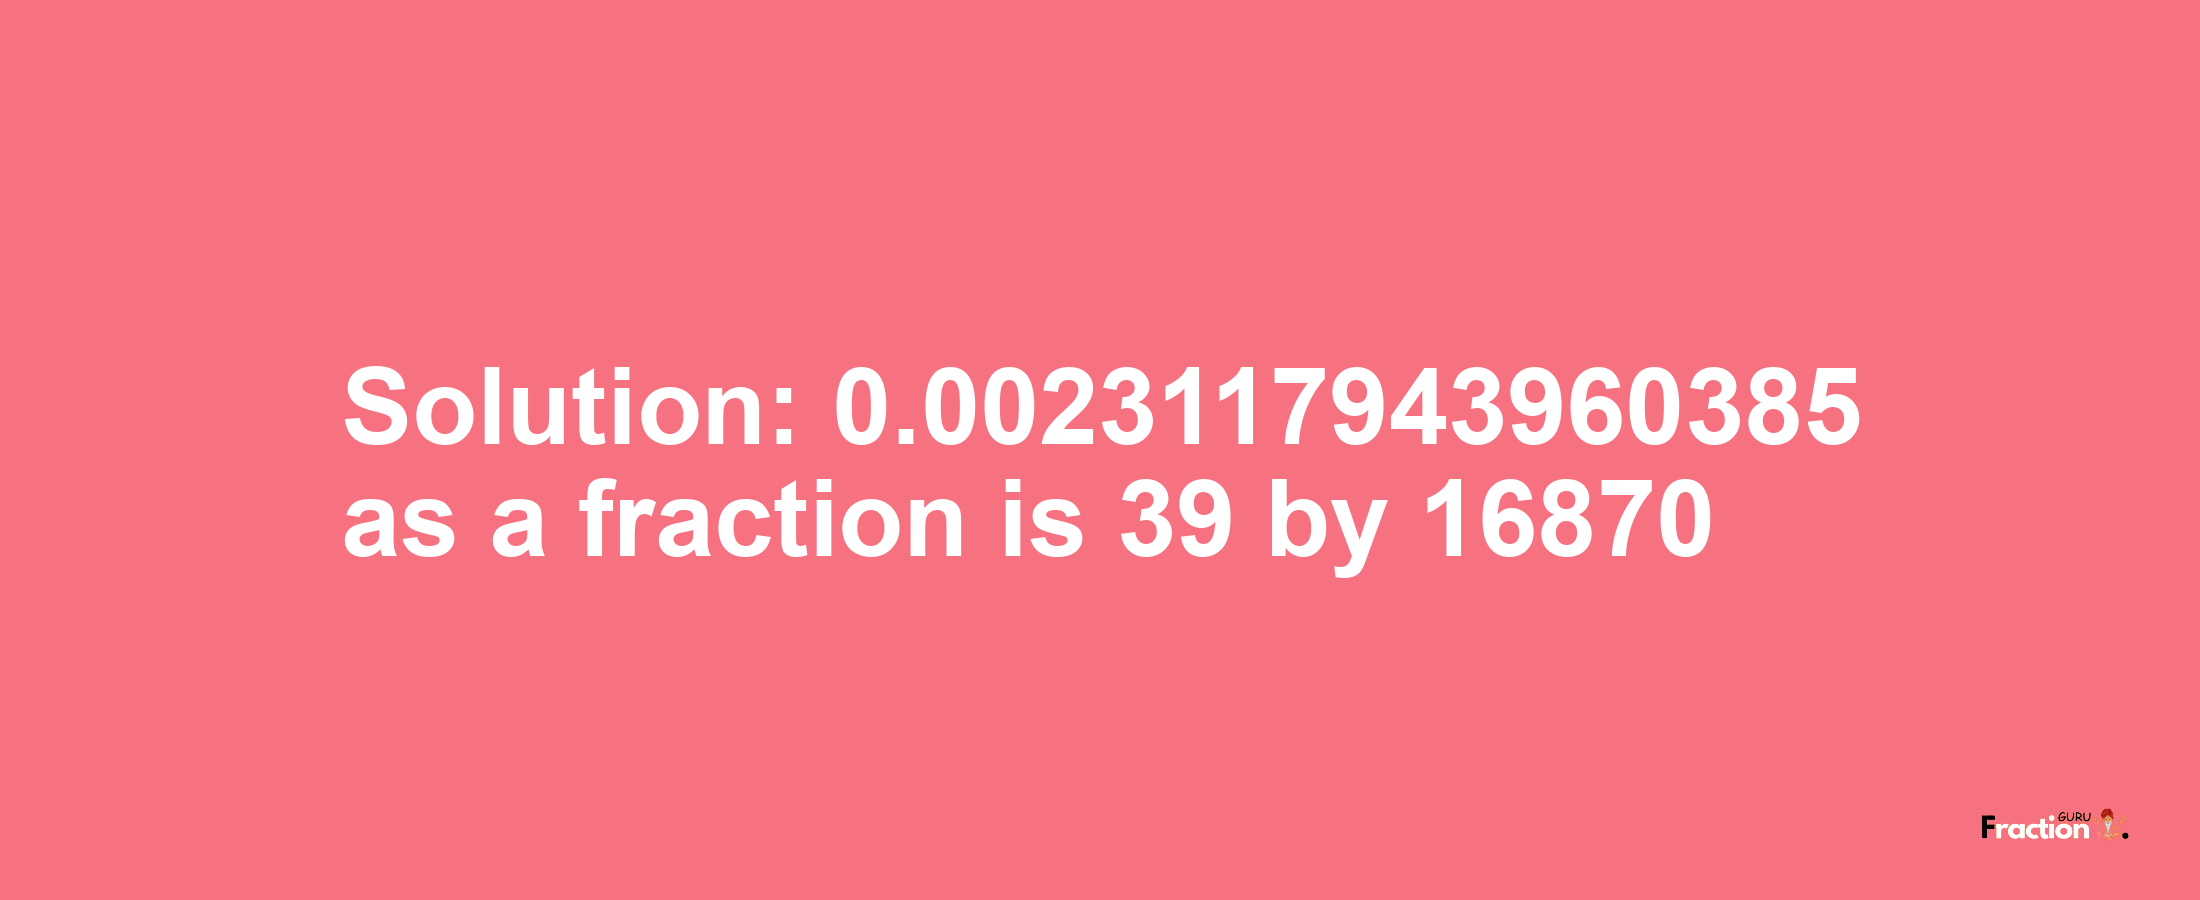 Solution:0.0023117943960385 as a fraction is 39/16870